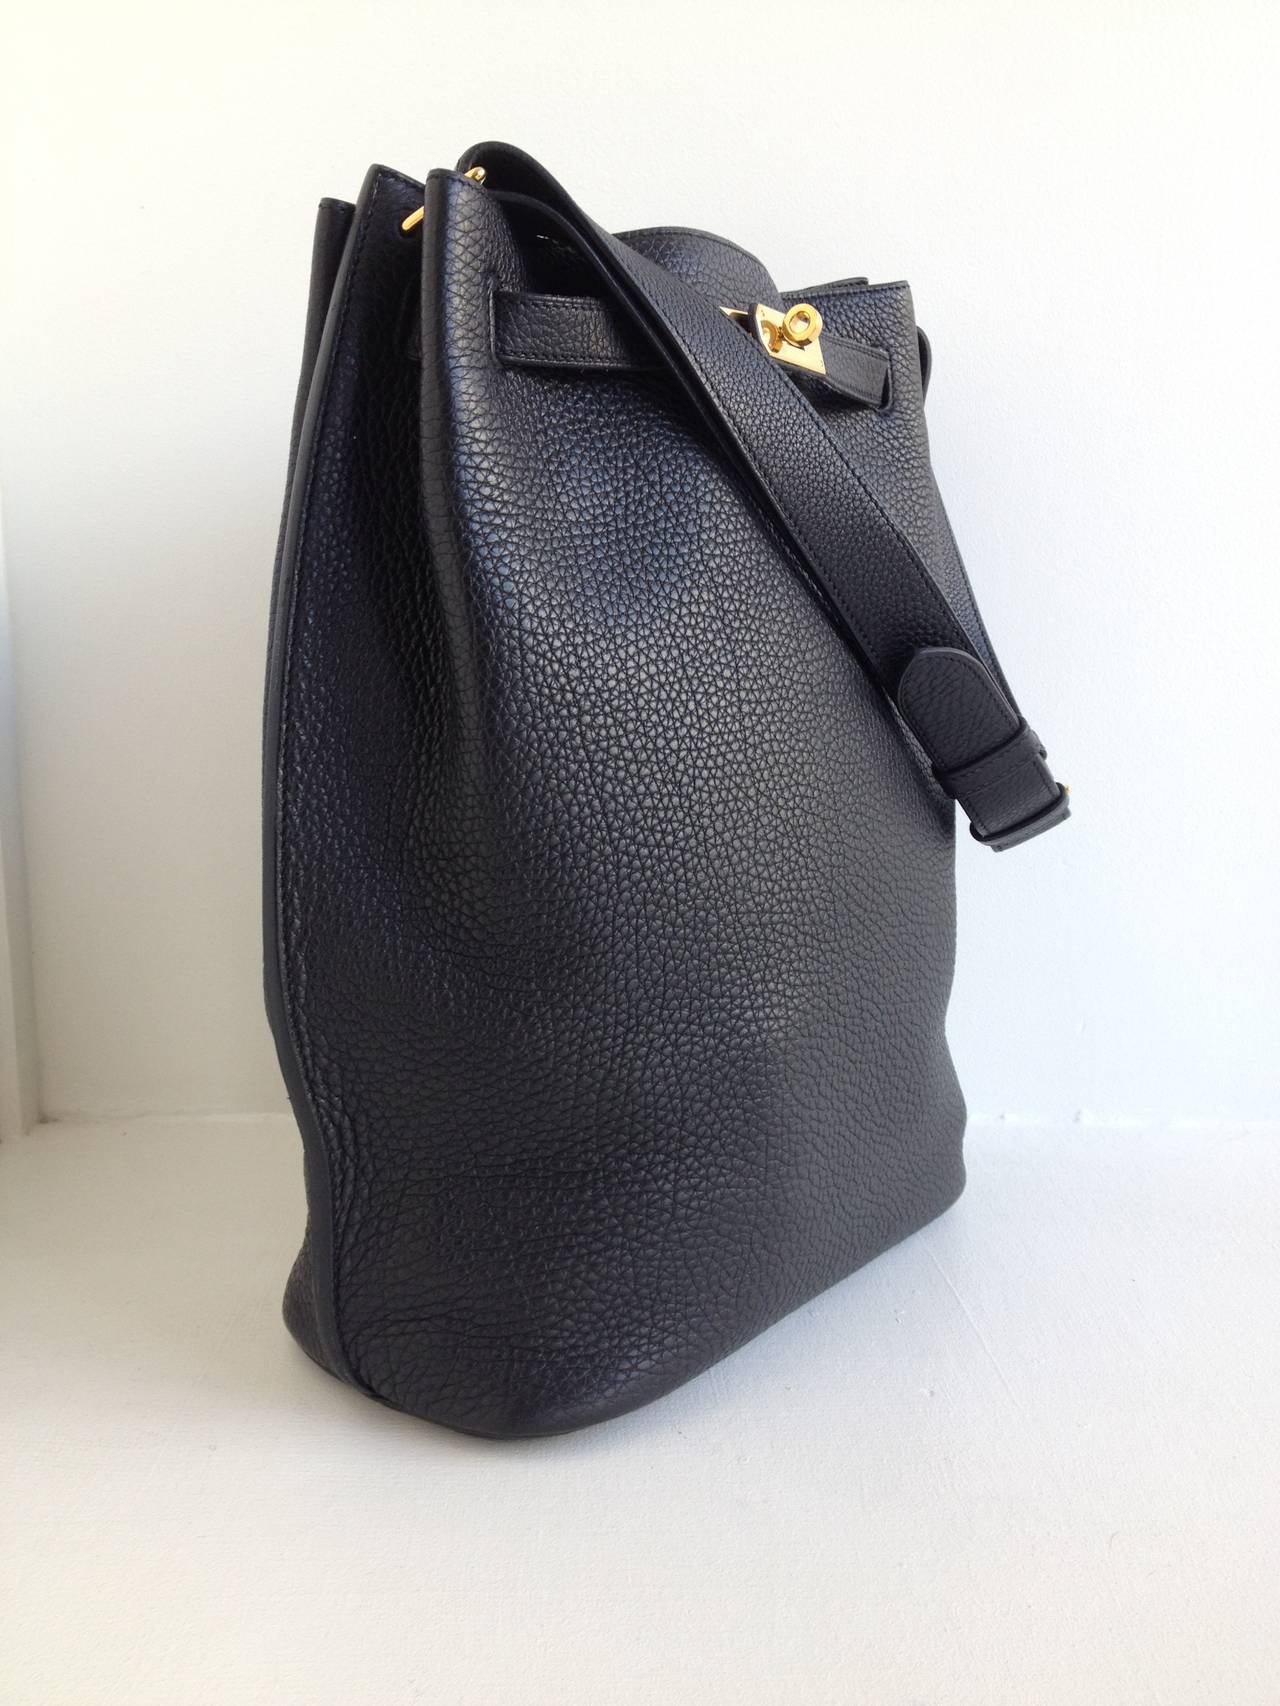 The So Kelly is truly the perfect bag for the modern woman. Easy and hands-free, its strap rises 9.5 inches above the top of the bag, while the soft and spacious bucket style fits everything you could need for the day. Black leather with gold